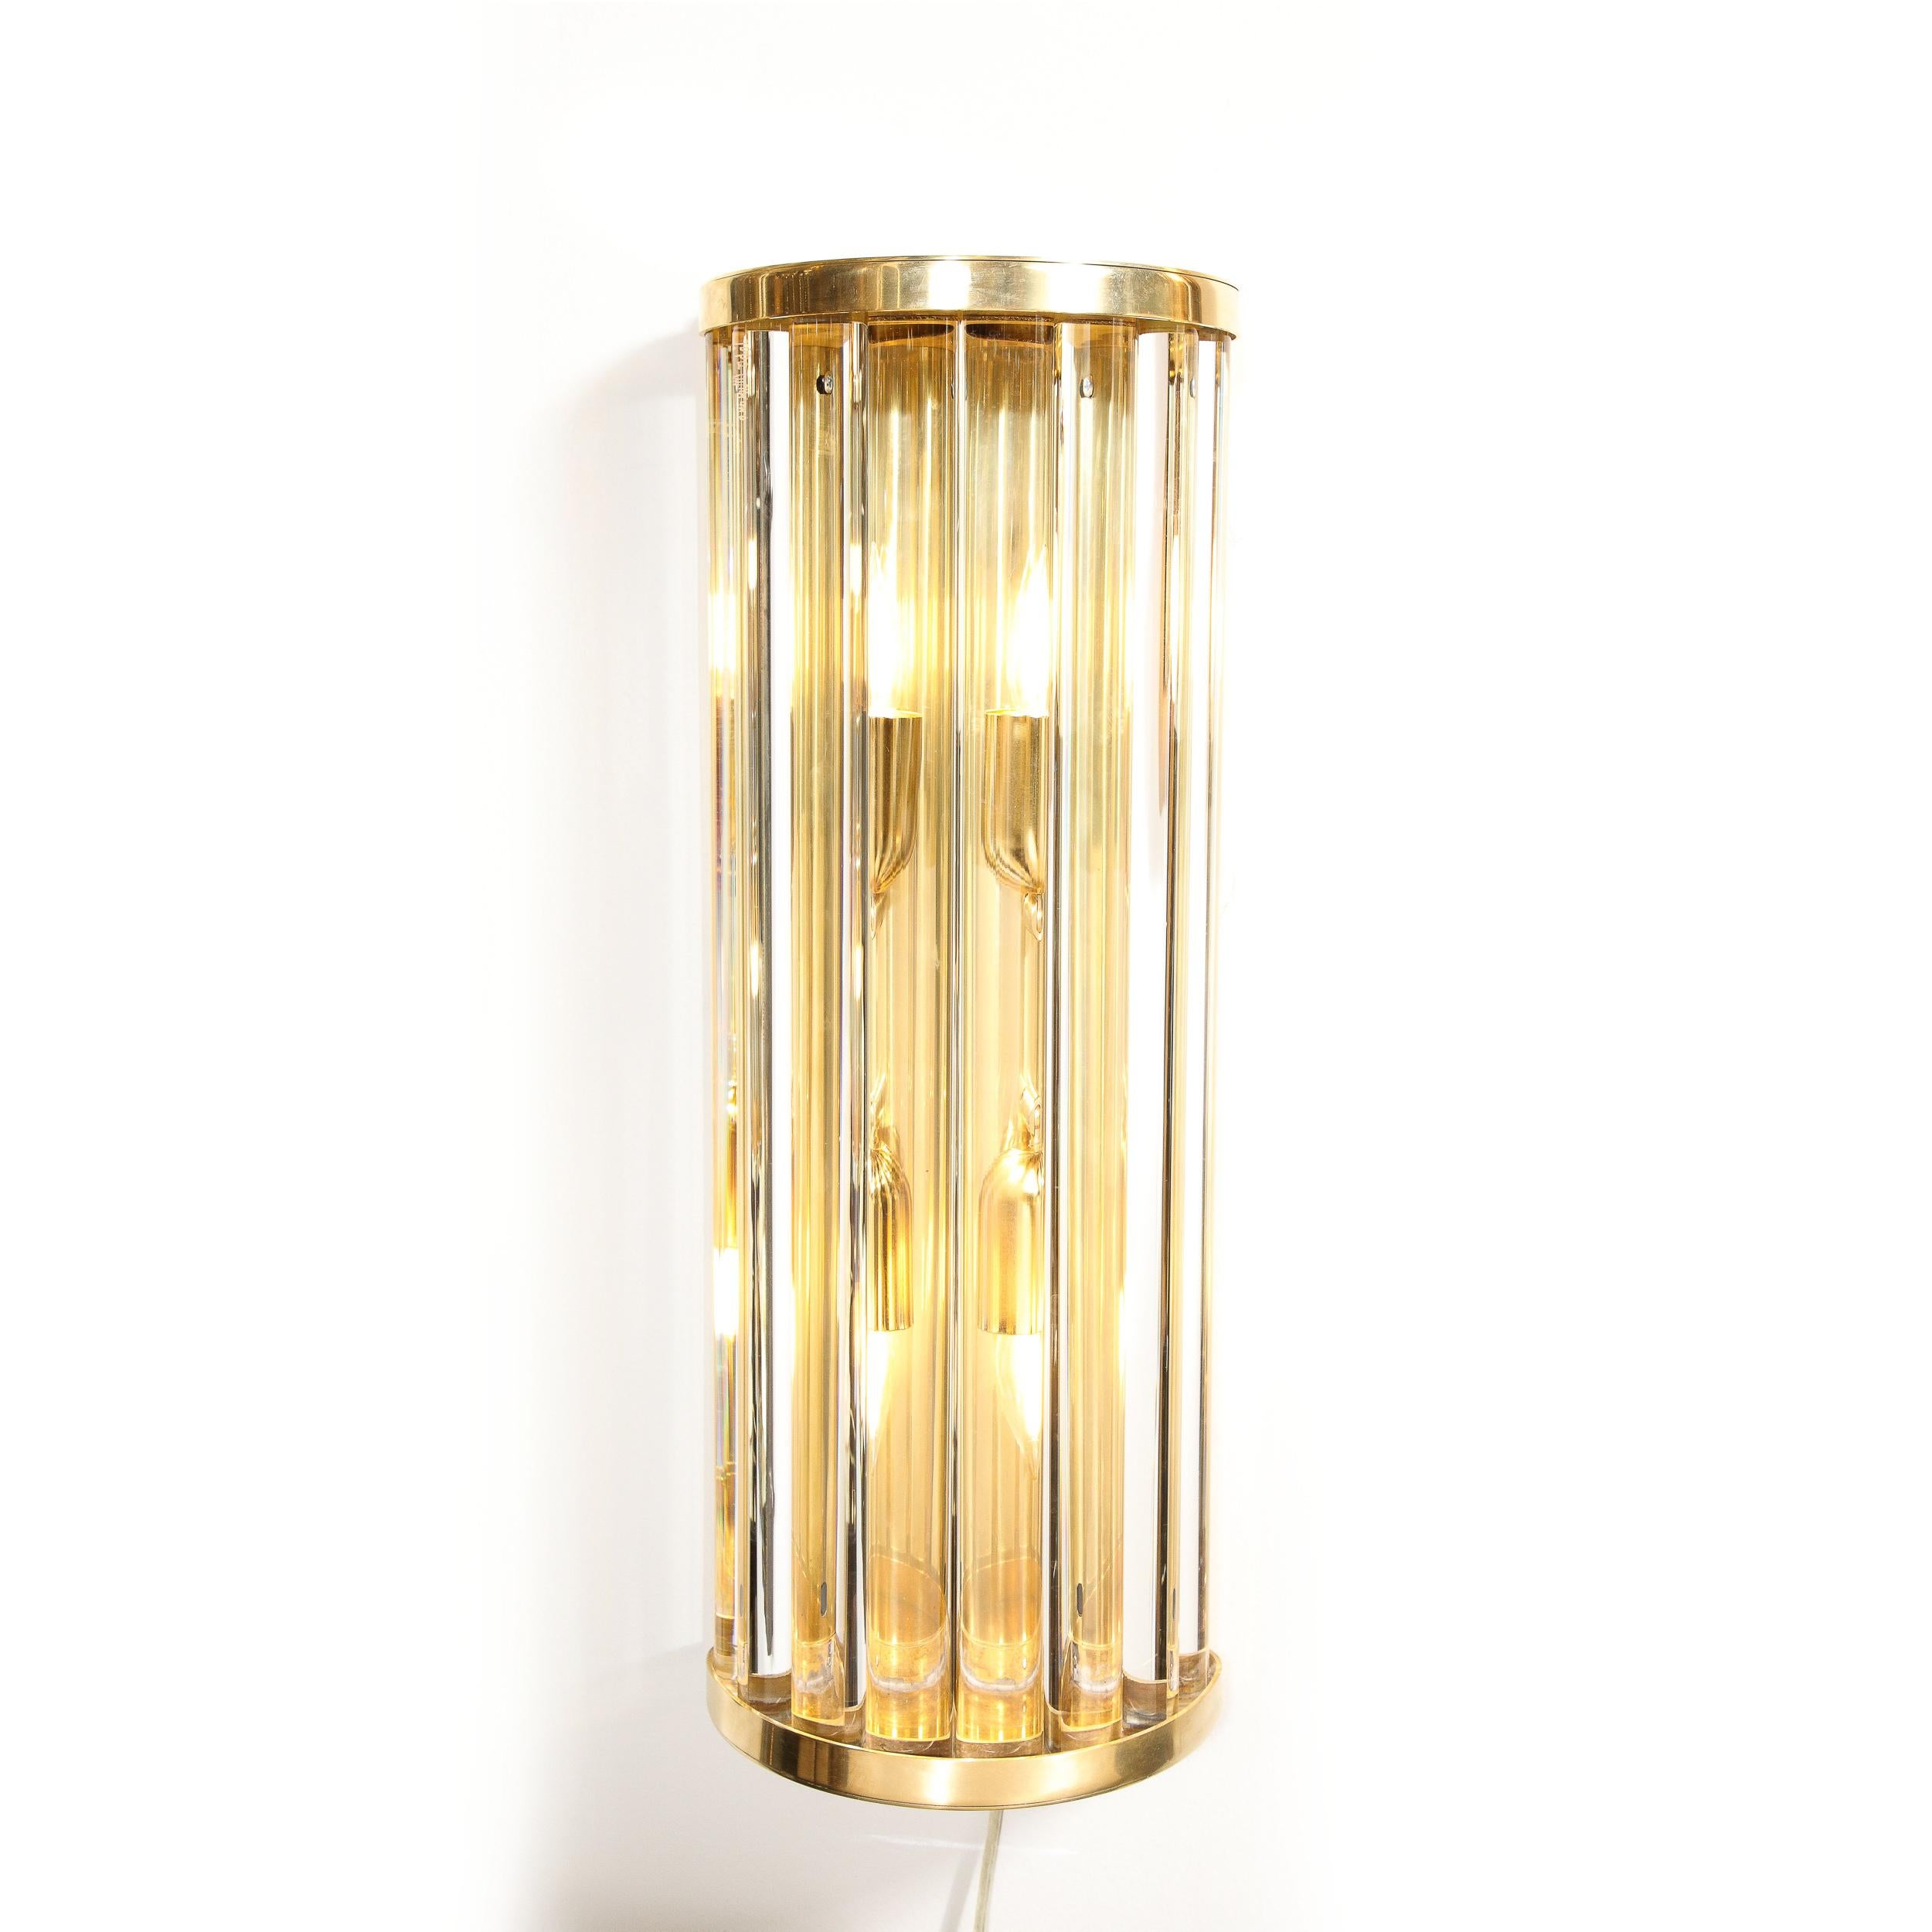 This Pair of Mid-Century Modernist Sconces in Glass Rods and Brass fittings were created by Toso Murano and originate from Italy during the latter half of the 20th Century. Featuring gorgeous translucent glass rods in a curved demilune frame in